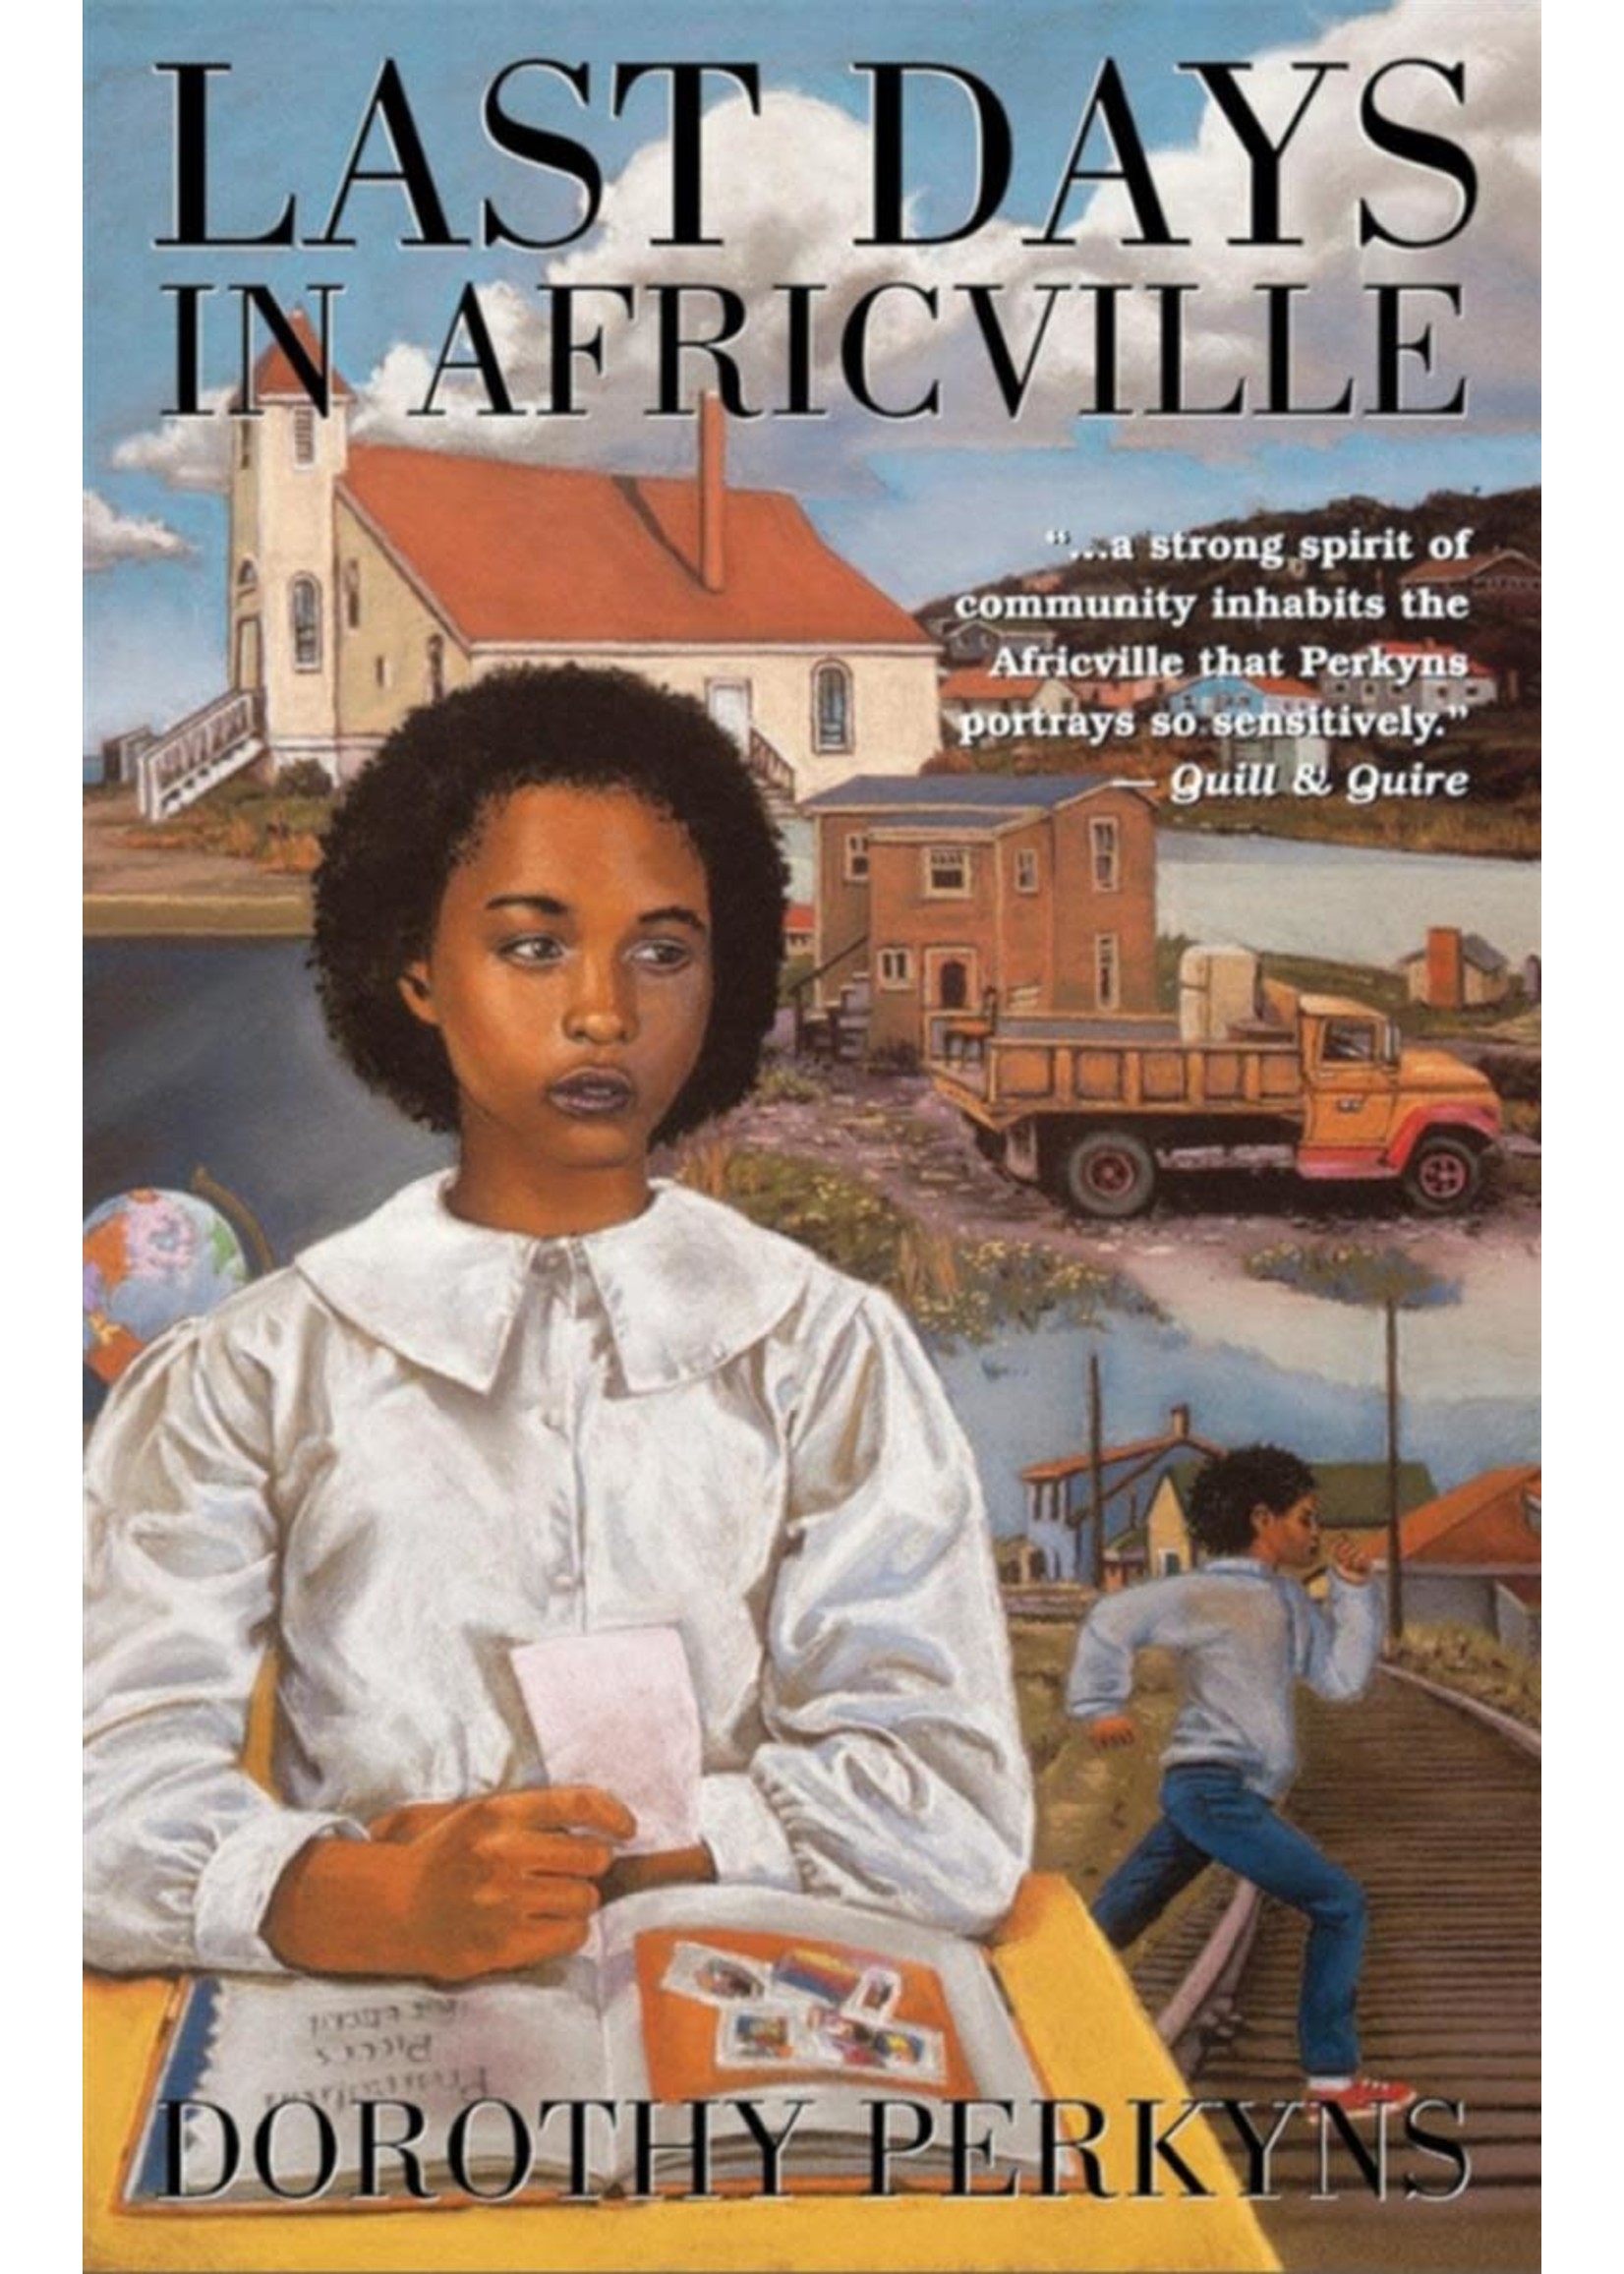 Last Days in Africville by Dorothy Perkyns